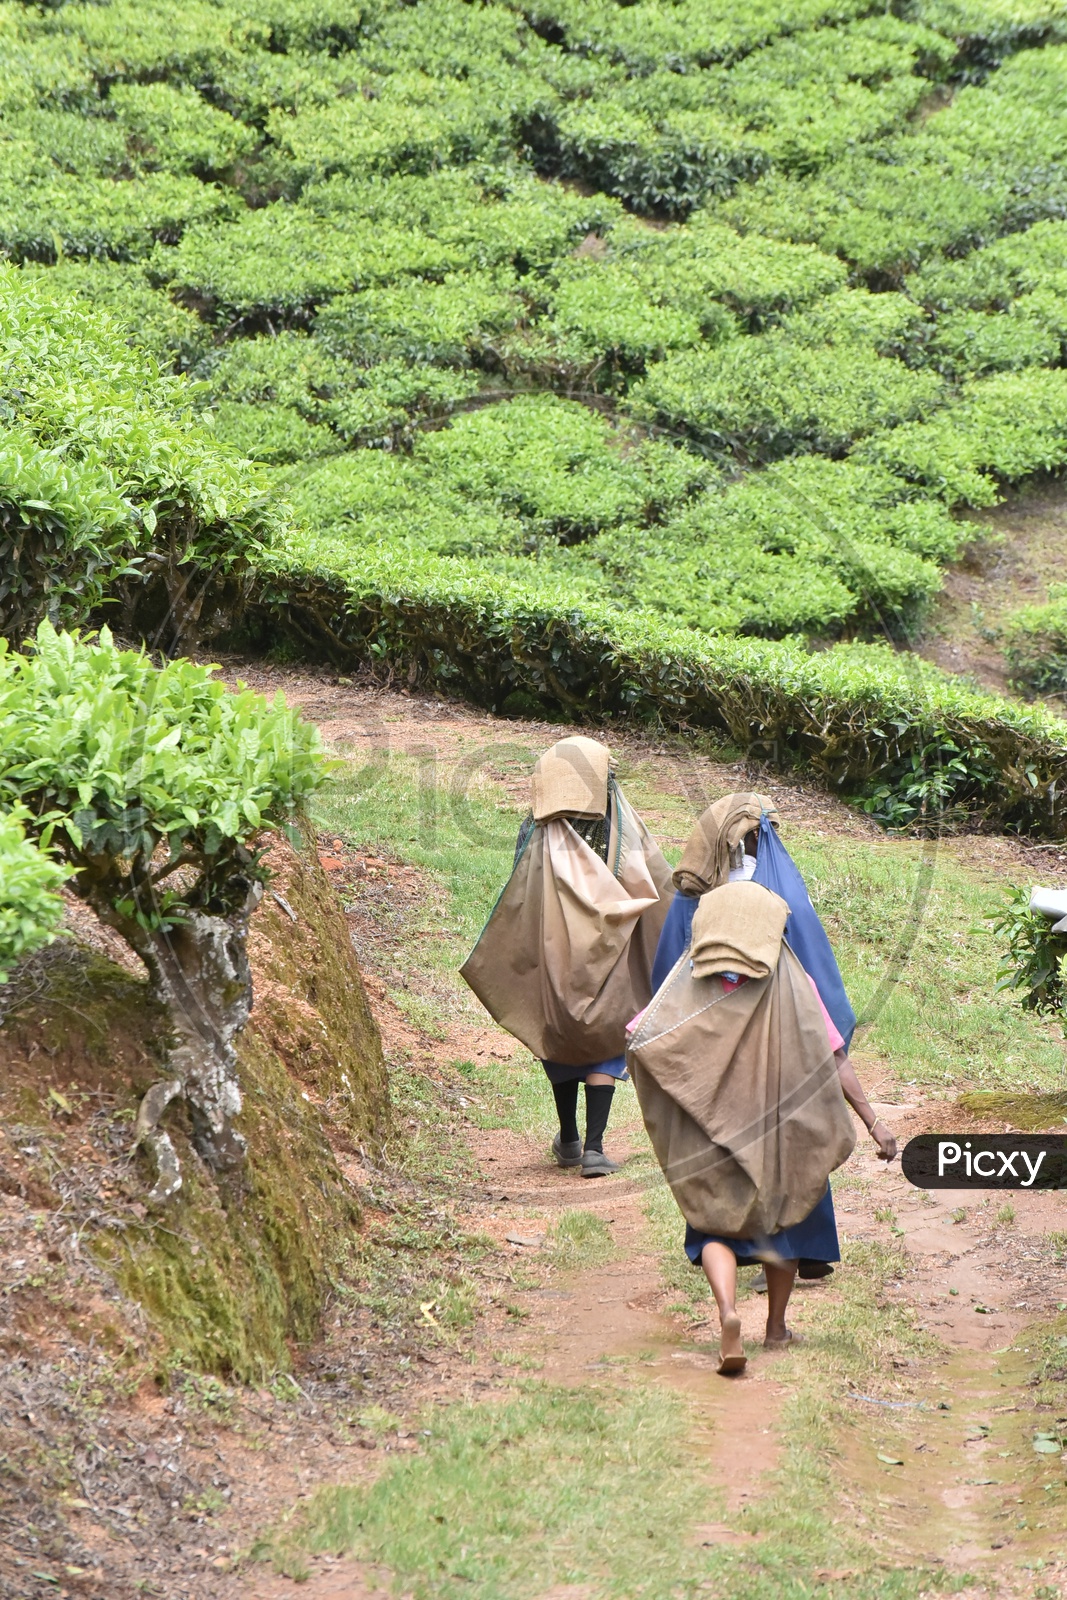 Indian Woman Workers Of Tea Plantation in Munnar Walking in Tea Plantations With Bags On Their